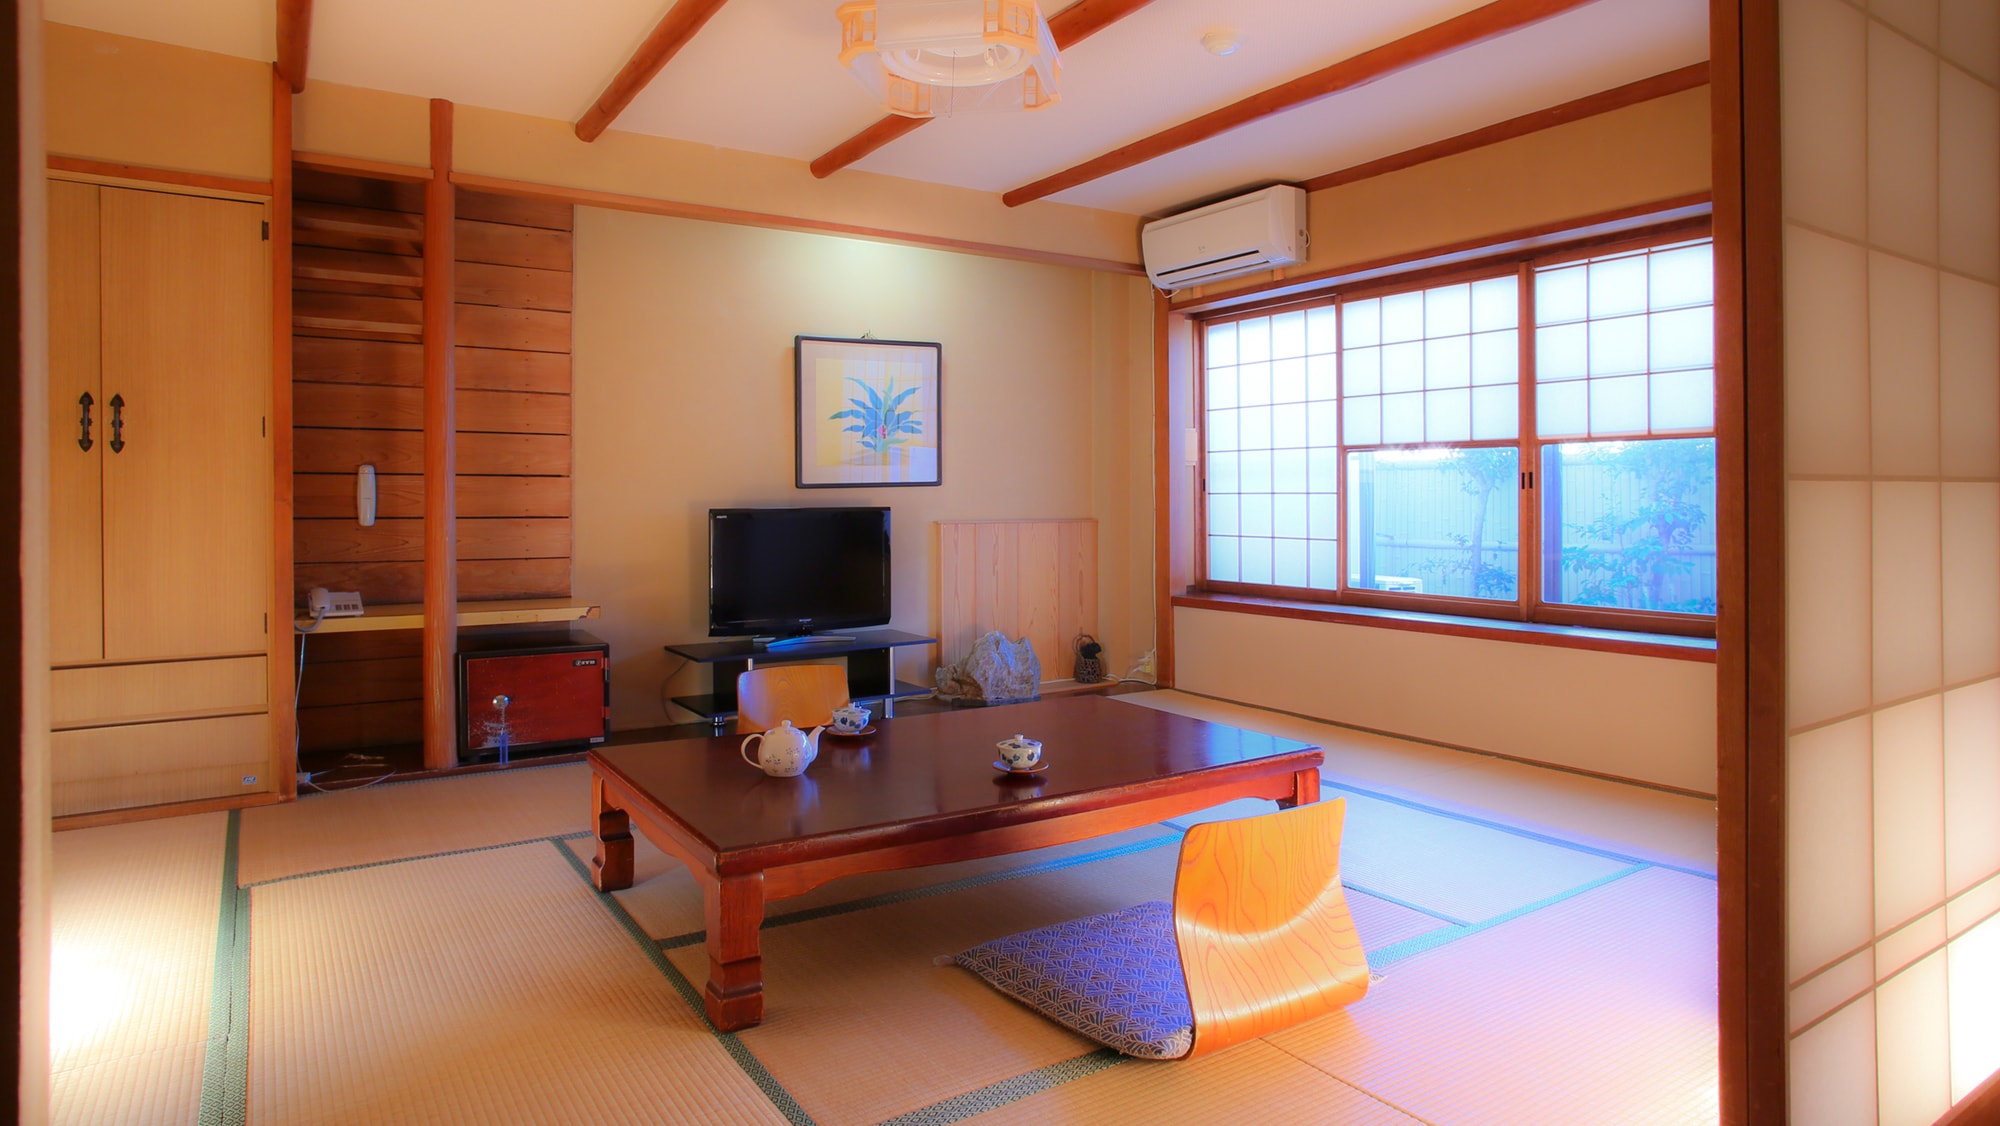 Showa retro and emotional guest room